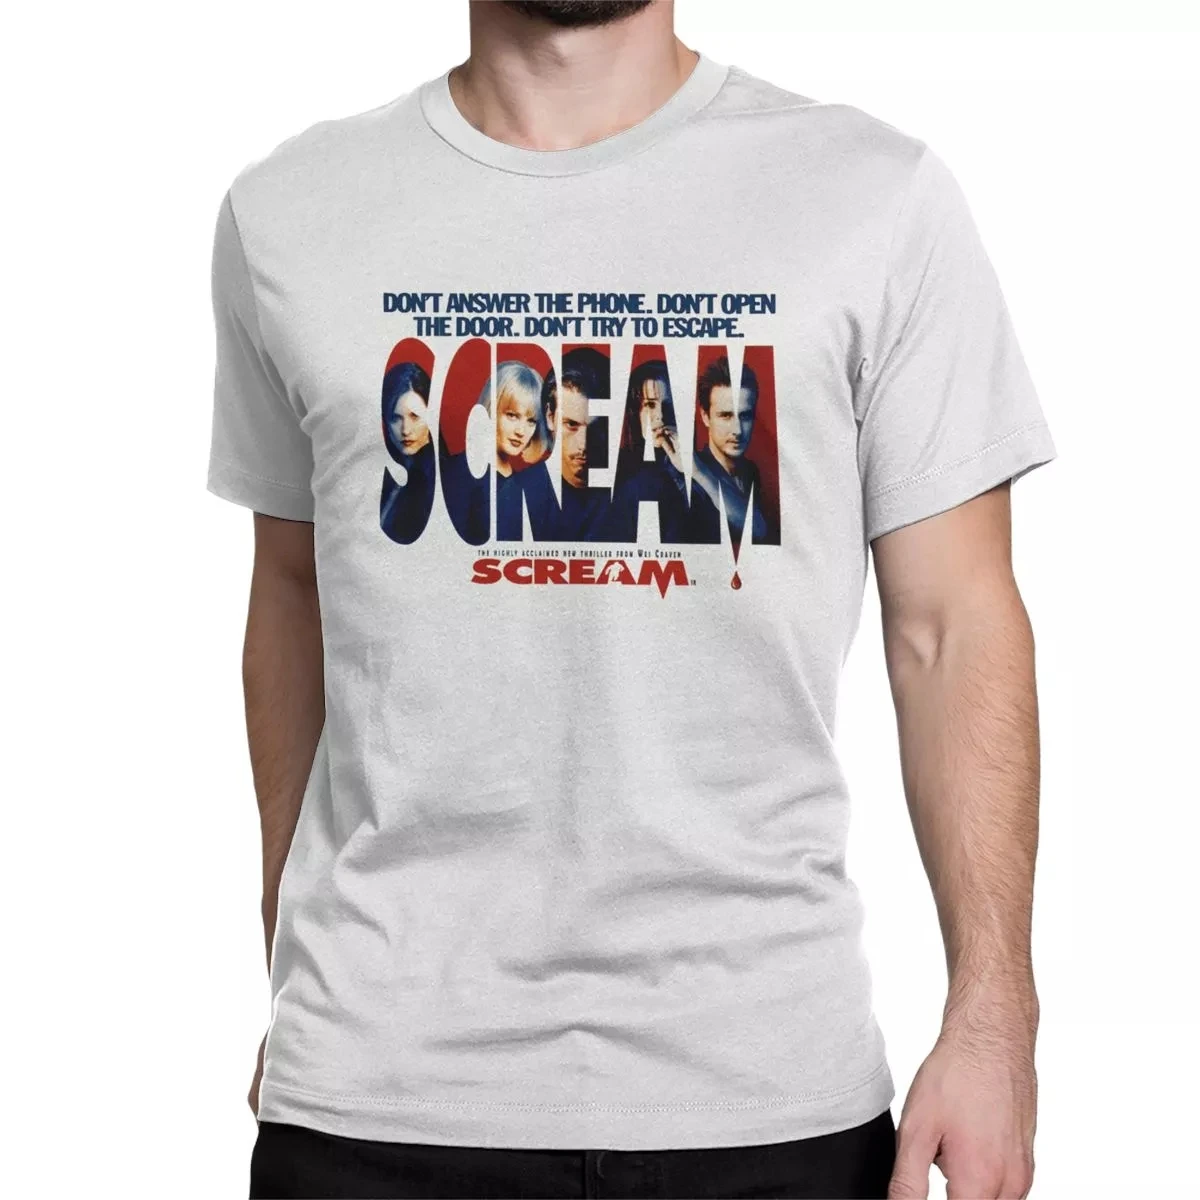 

Crazy Scream Horror Movie T-Shirts Men Women T Shirt Don't Answer the Phone Don't Open the Door Don't Try to Escape Tee Shirt